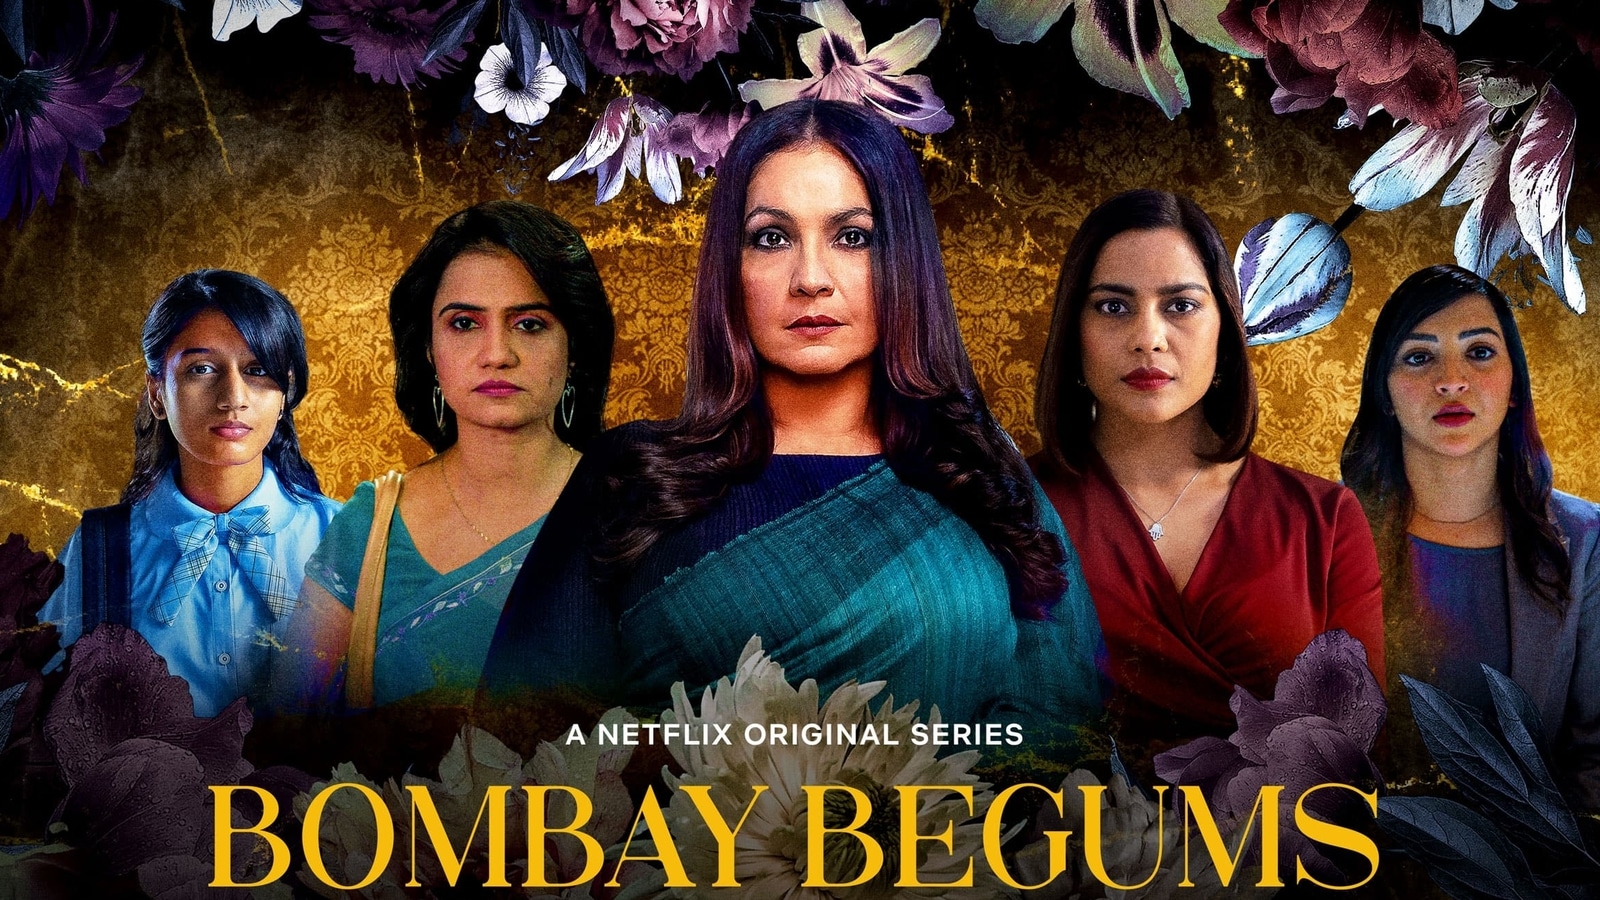 Pooja Bhatt reacts to Bombay Begums controversy, says it's a glorious show  | Web Series - Hindustan Times